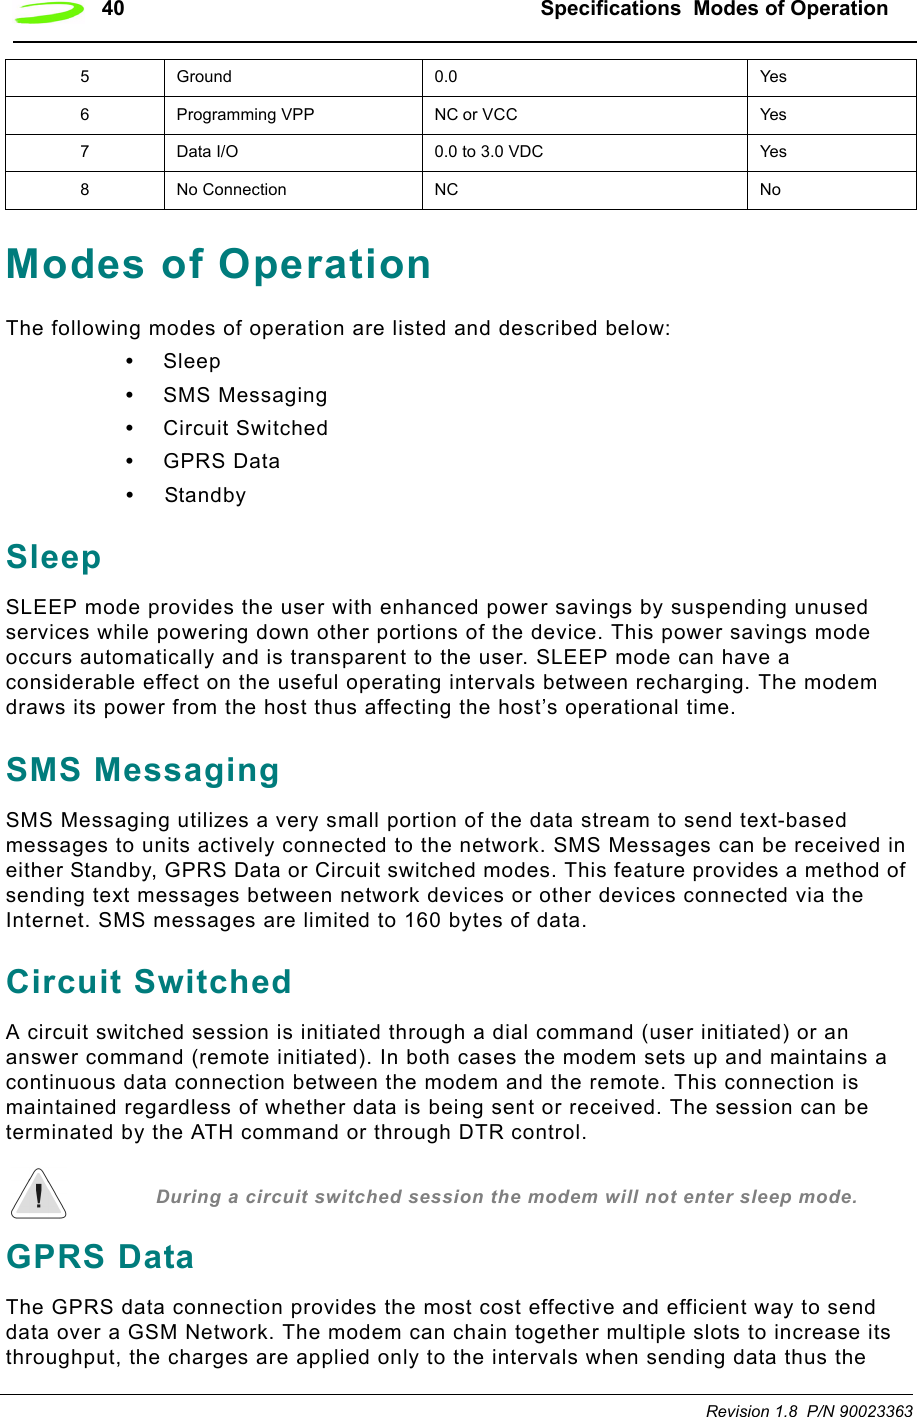 40 Specifications  Modes of OperationRevision 1.8  P/N 90023363Modes of OperationThe following modes of operation are listed and described below:•Sleep•SMS Messaging•Circuit Switched•GPRS Data•StandbySleepSLEEP mode provides the user with enhanced power savings by suspending unused services while powering down other portions of the device. This power savings mode occurs automatically and is transparent to the user. SLEEP mode can have a considerable effect on the useful operating intervals between recharging. The modem draws its power from the host thus affecting the host’s operational time. SMS MessagingSMS Messaging utilizes a very small portion of the data stream to send text-based messages to units actively connected to the network. SMS Messages can be received in either Standby, GPRS Data or Circuit switched modes. This feature provides a method of sending text messages between network devices or other devices connected via the Internet. SMS messages are limited to 160 bytes of data.Circuit SwitchedA circuit switched session is initiated through a dial command (user initiated) or an answer command (remote initiated). In both cases the modem sets up and maintains a continuous data connection between the modem and the remote. This connection is maintained regardless of whether data is being sent or received. The session can be terminated by the ATH command or through DTR control. During a circuit switched session the modem will not enter sleep mode. GPRS DataThe GPRS data connection provides the most cost effective and efficient way to send data over a GSM Network. The modem can chain together multiple slots to increase its throughput, the charges are applied only to the intervals when sending data thus the 5 Ground 0.0 Yes6 Programming VPP NC or VCC Yes7 Data I/O 0.0 to 3.0 VDC Yes8 No Connection NC No